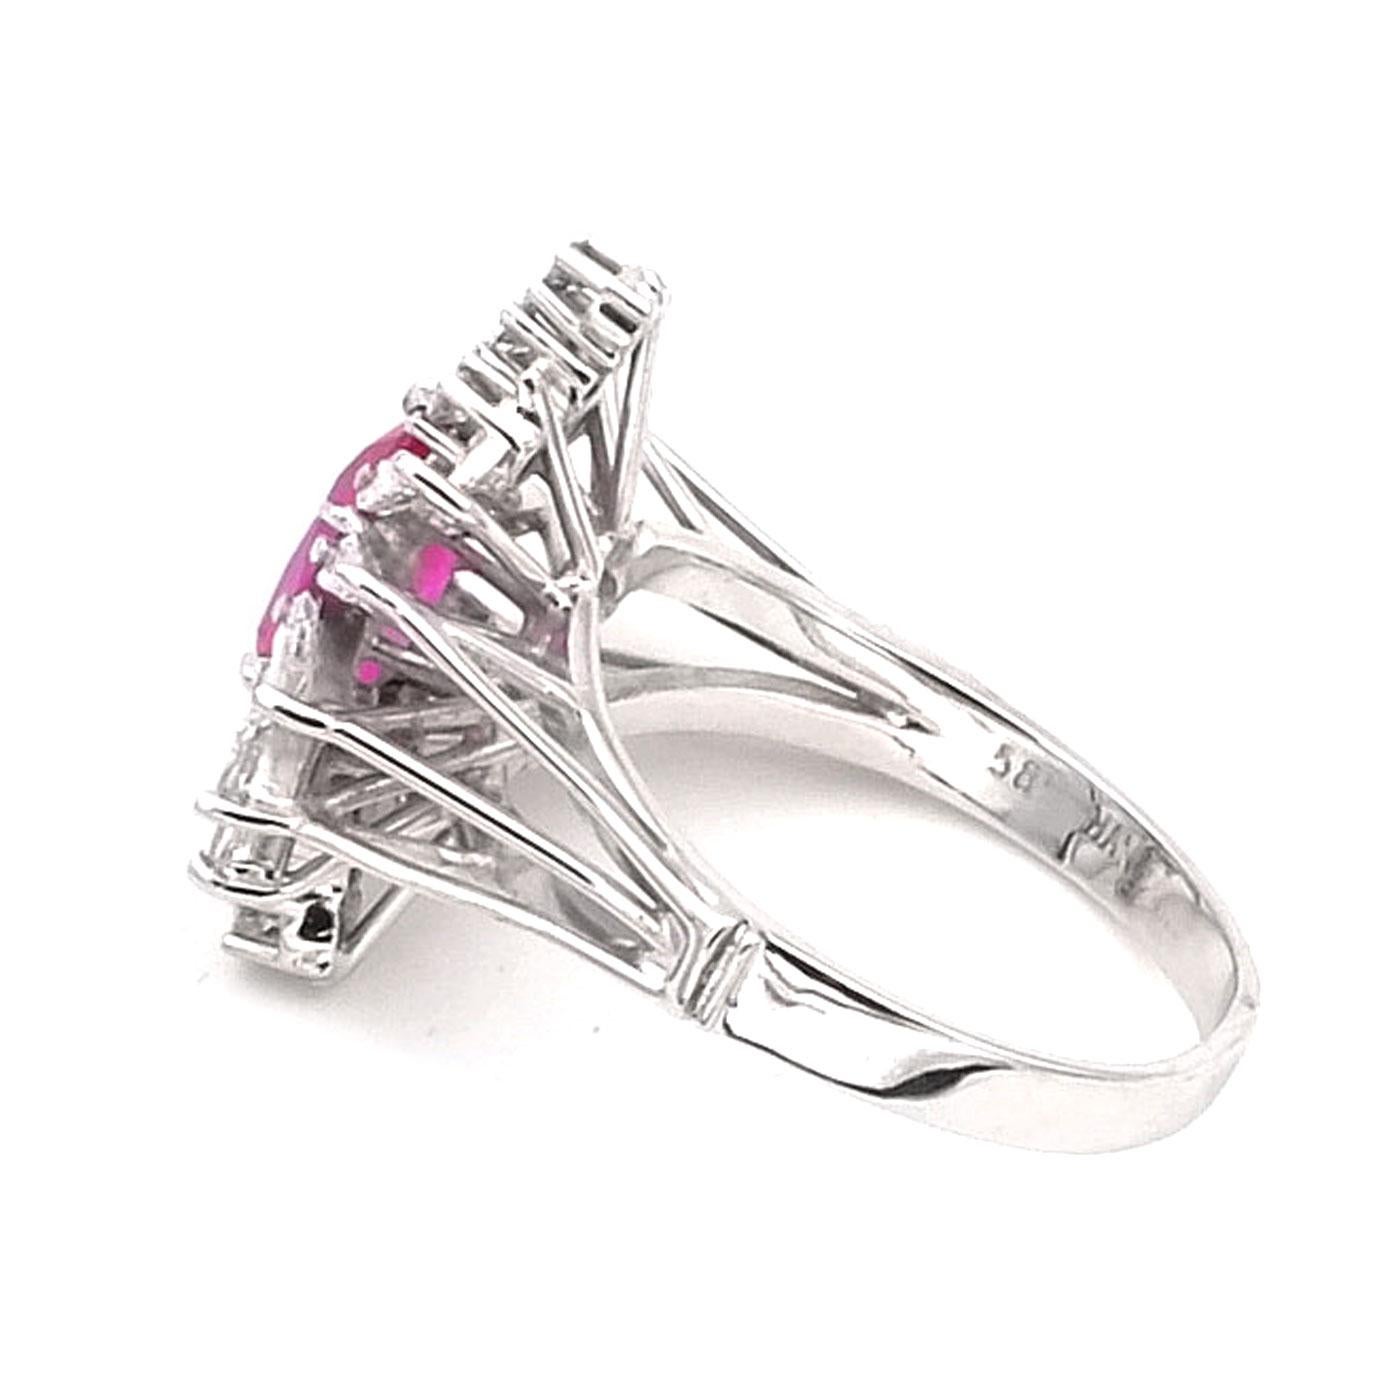 2.97 Carat No Heat Pink Sapphire Diamond White Gold Ring In Excellent Condition For Sale In Goettingen, DE